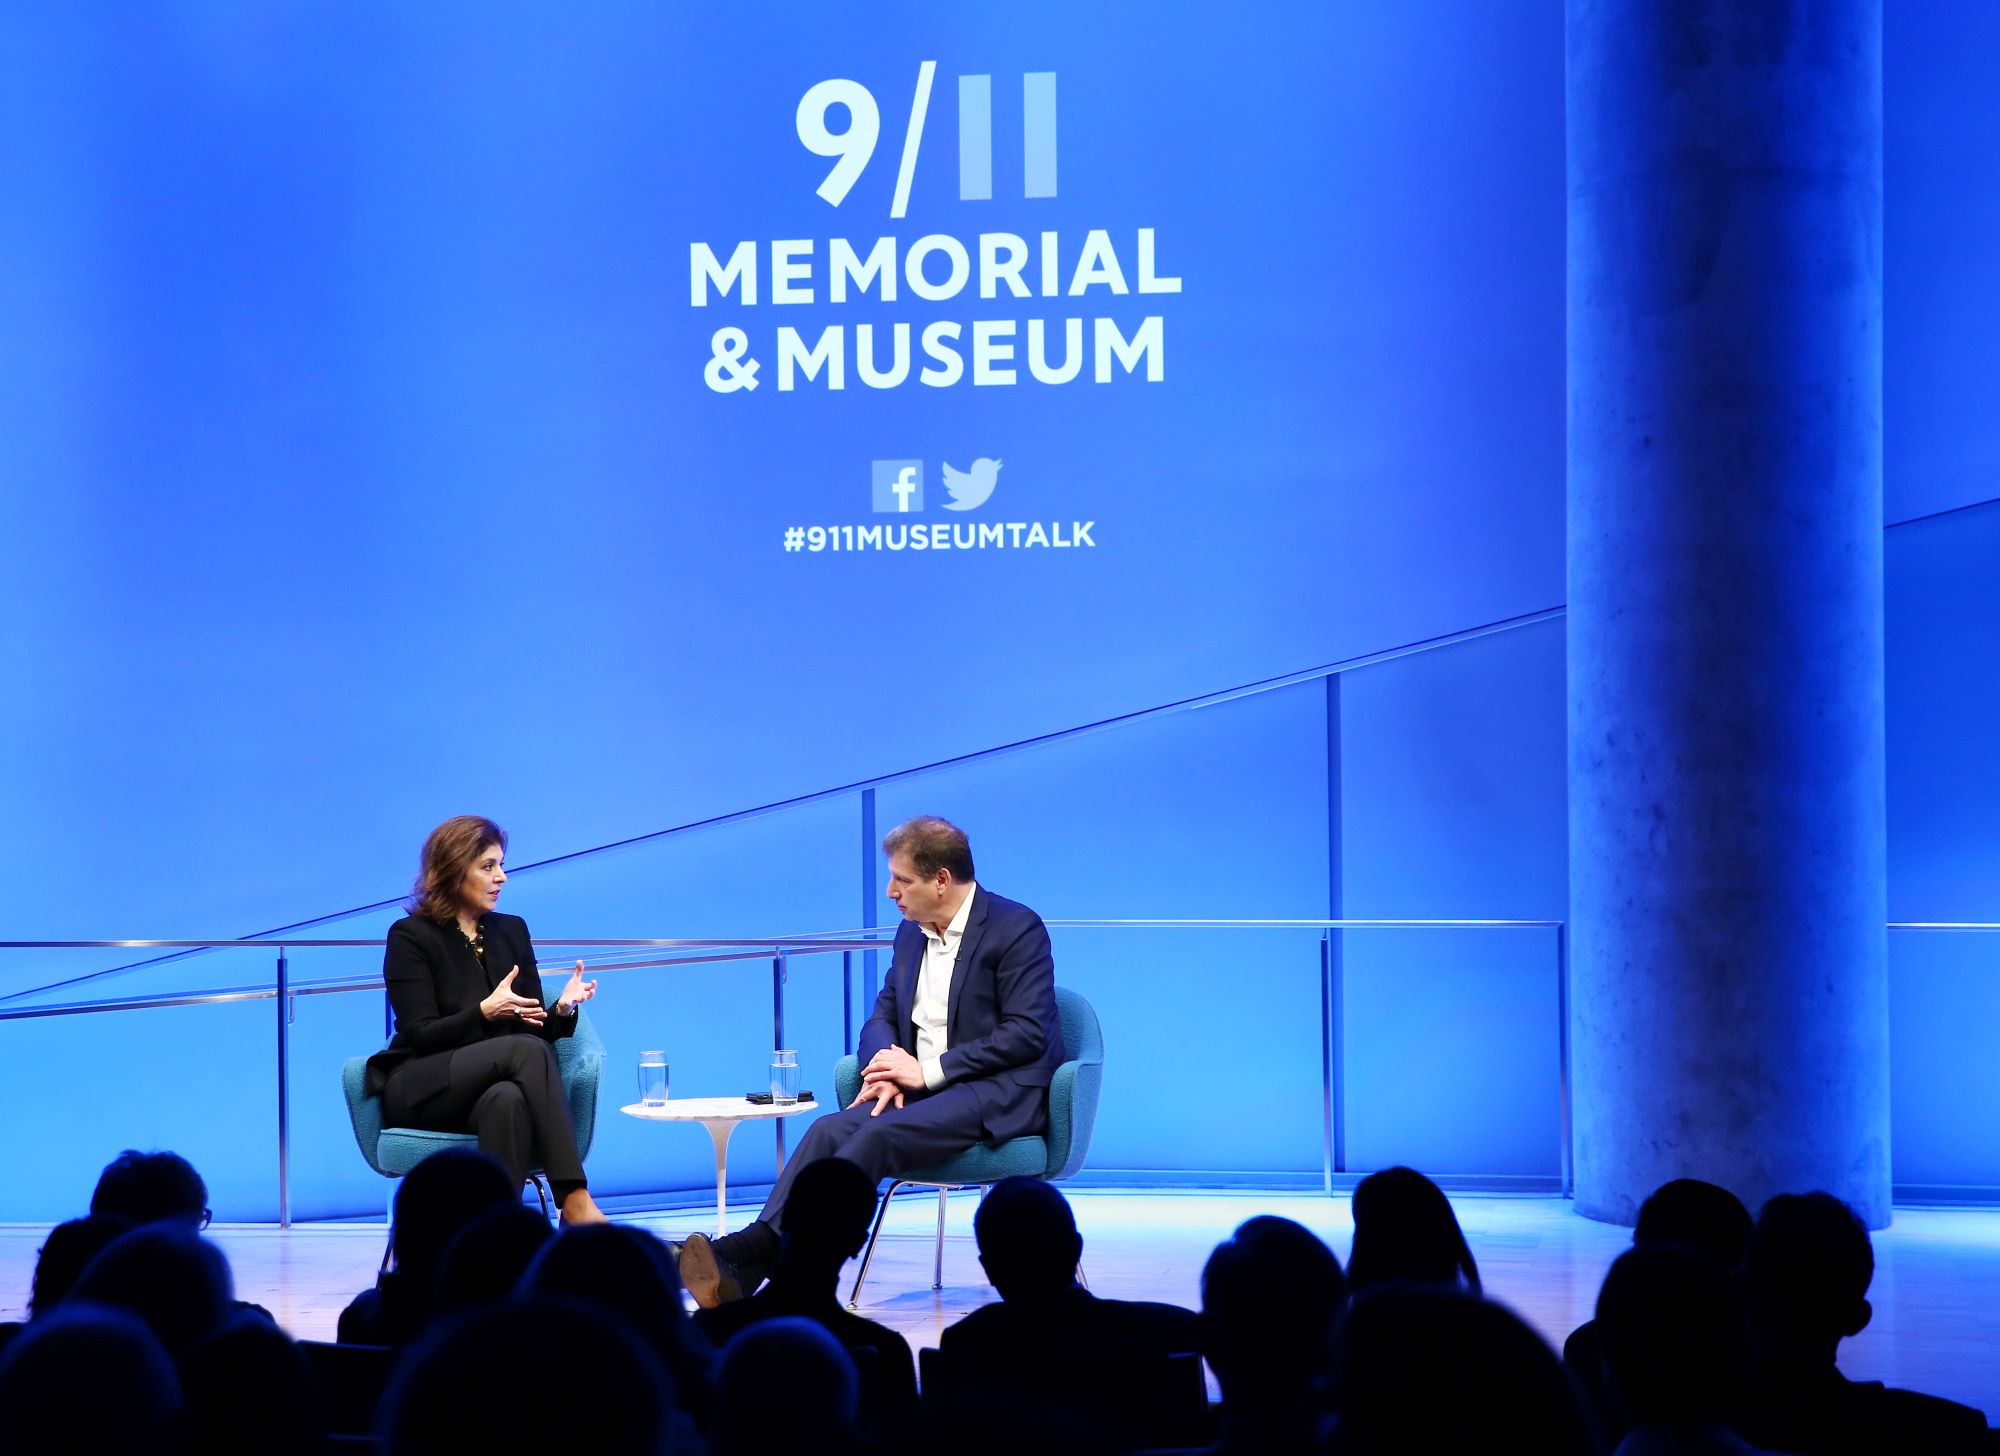 Author Farah Pandith gestures as she speaks with Foreign Affairs editor Gideon Rose onstage at the Museum auditorium. The silhouettes of audience members are visible in the foreground. The stage is lit up blue and white and the logo for the 9/11 Memorial & Museum is projected above Pandith and Rose. Audience members are silhouetted in the foreground.